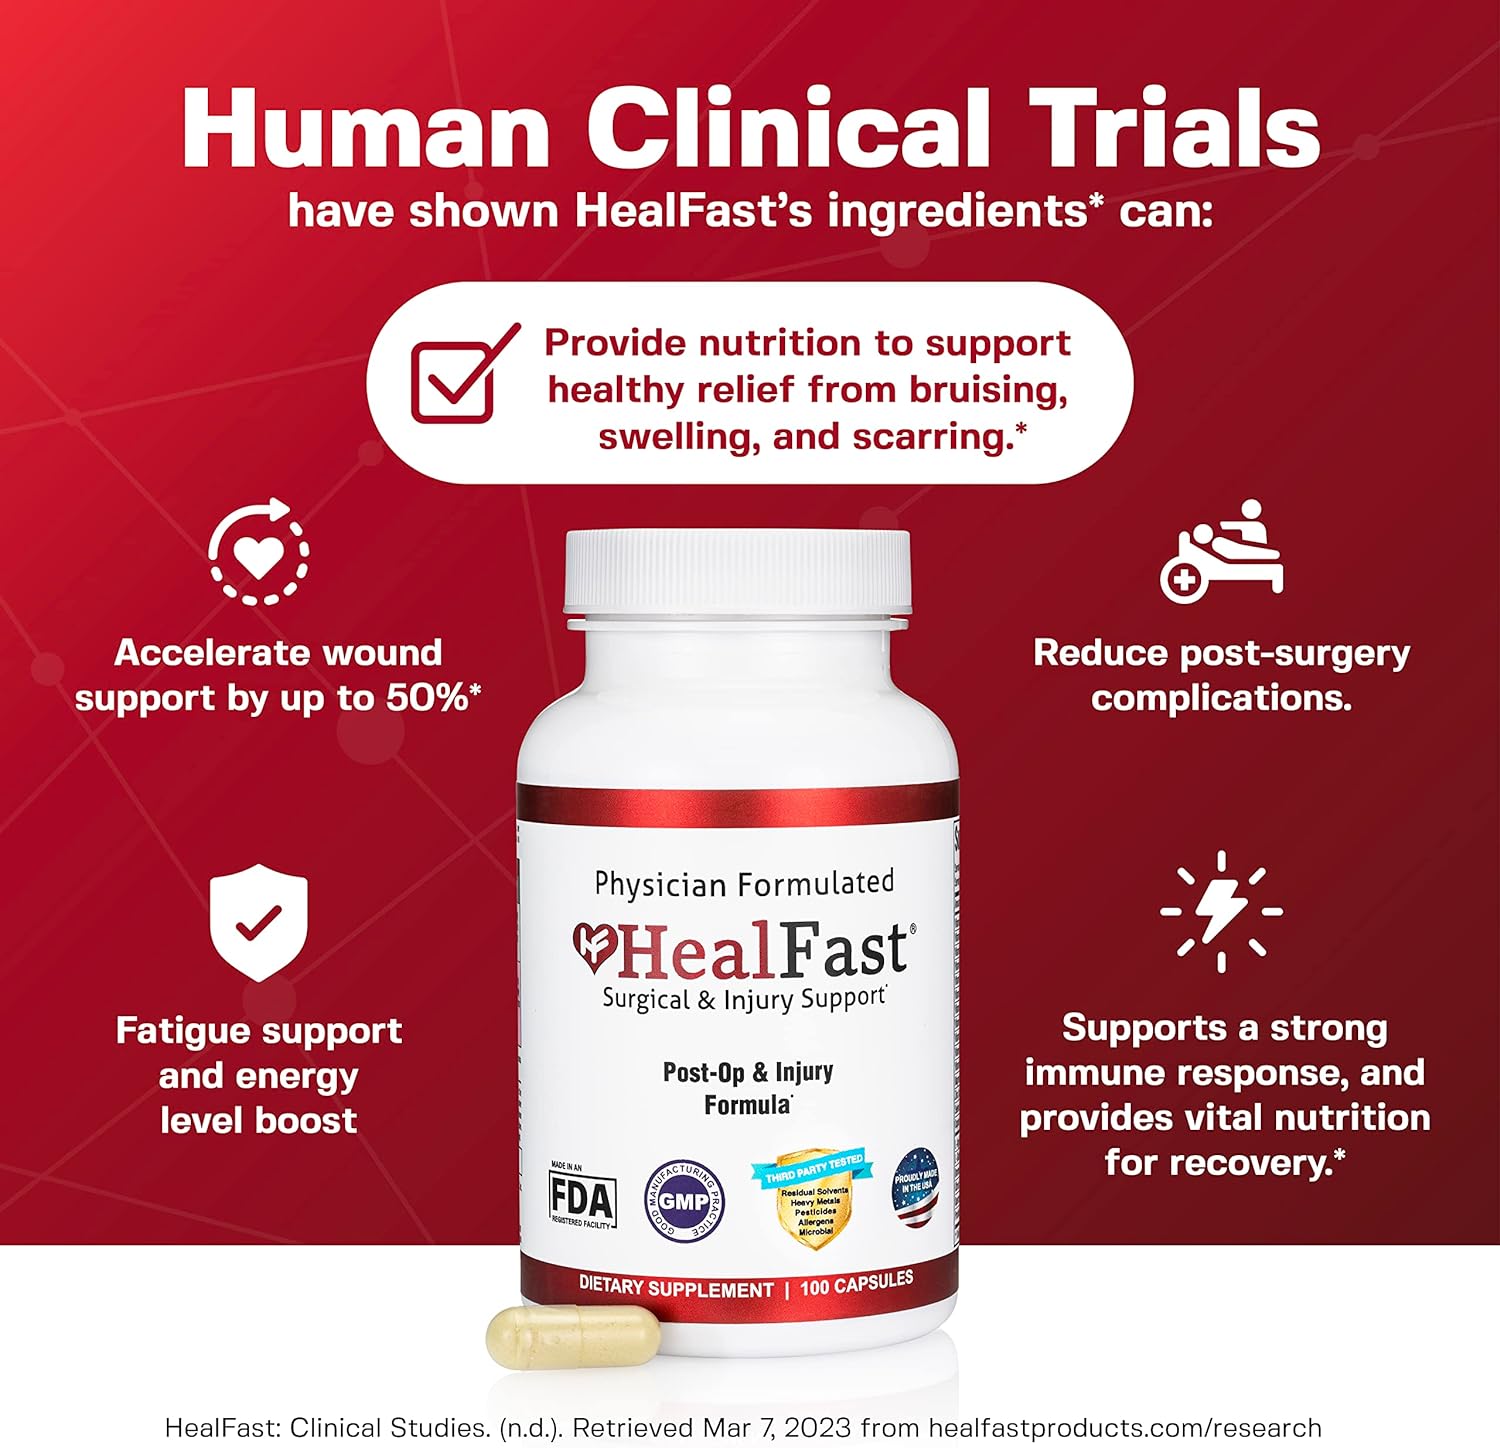 Human Clinical Trials Shows Multiple Benefits